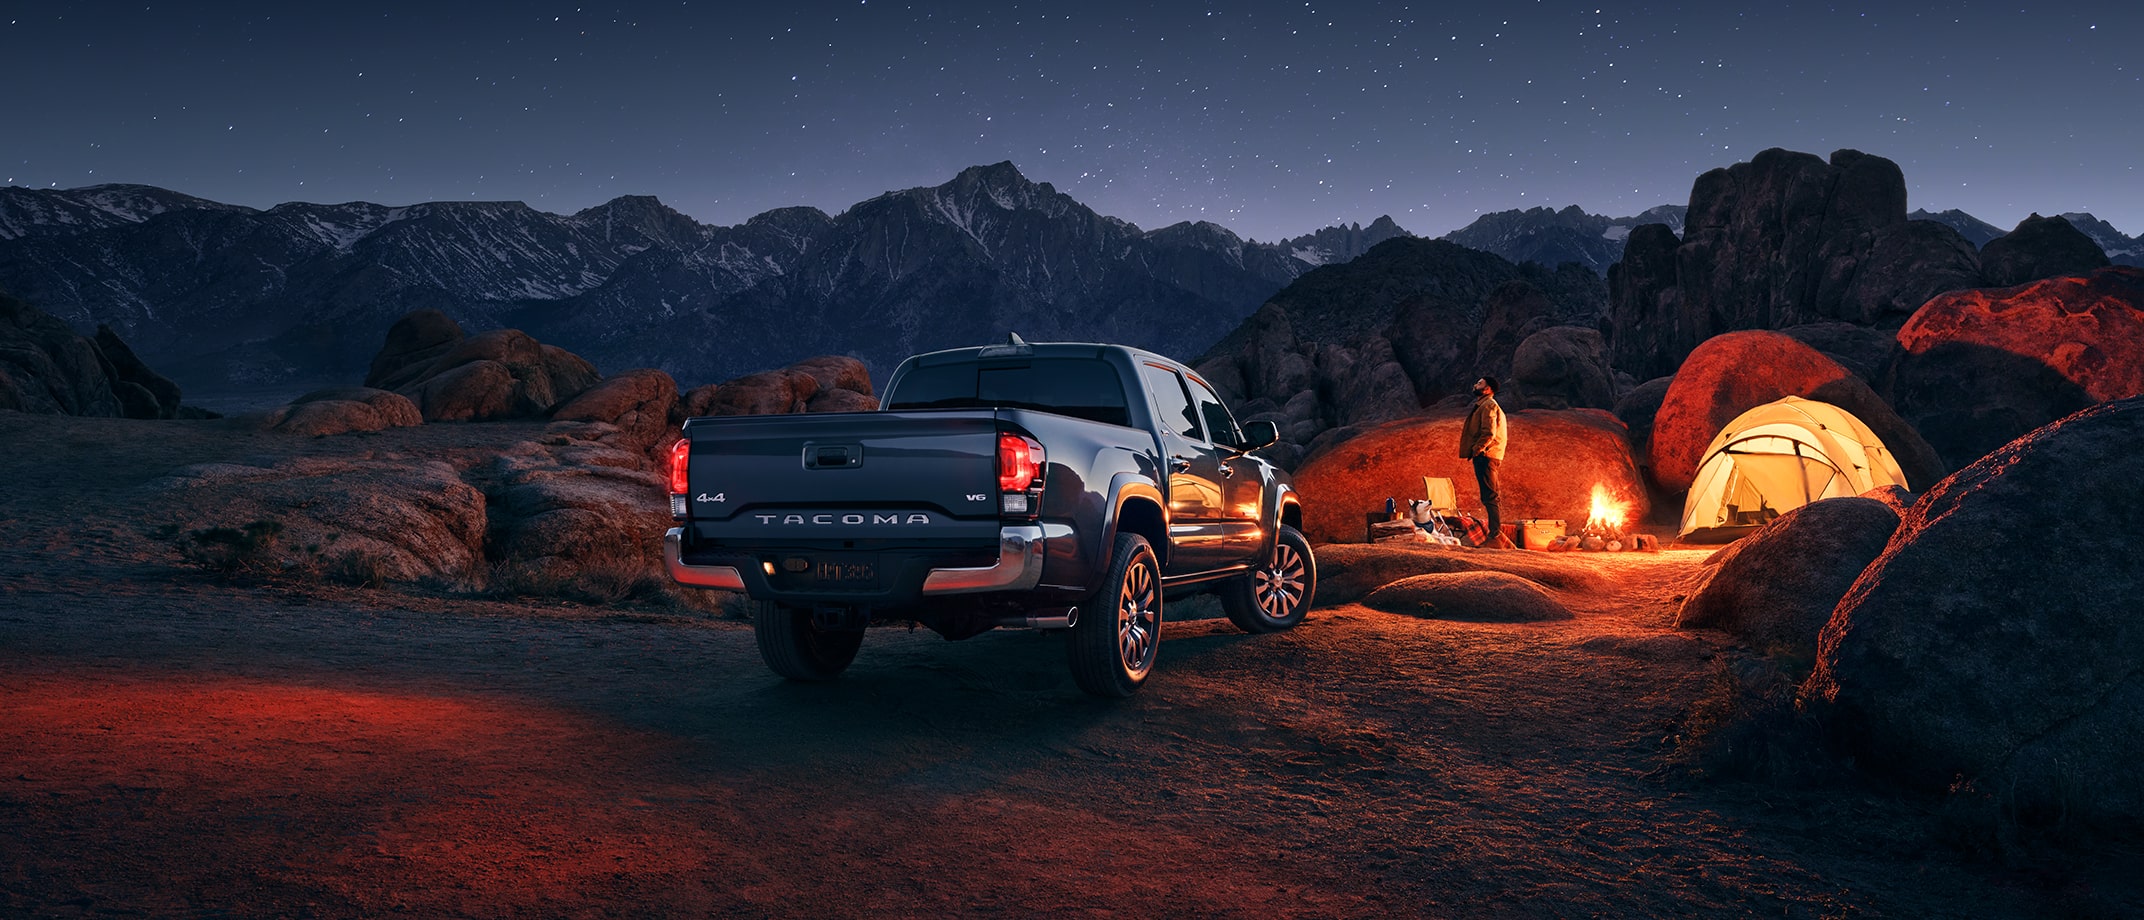 The Toyota Tundra is parked among boulders and mountains, right next to a campsite with a tent and campfire.